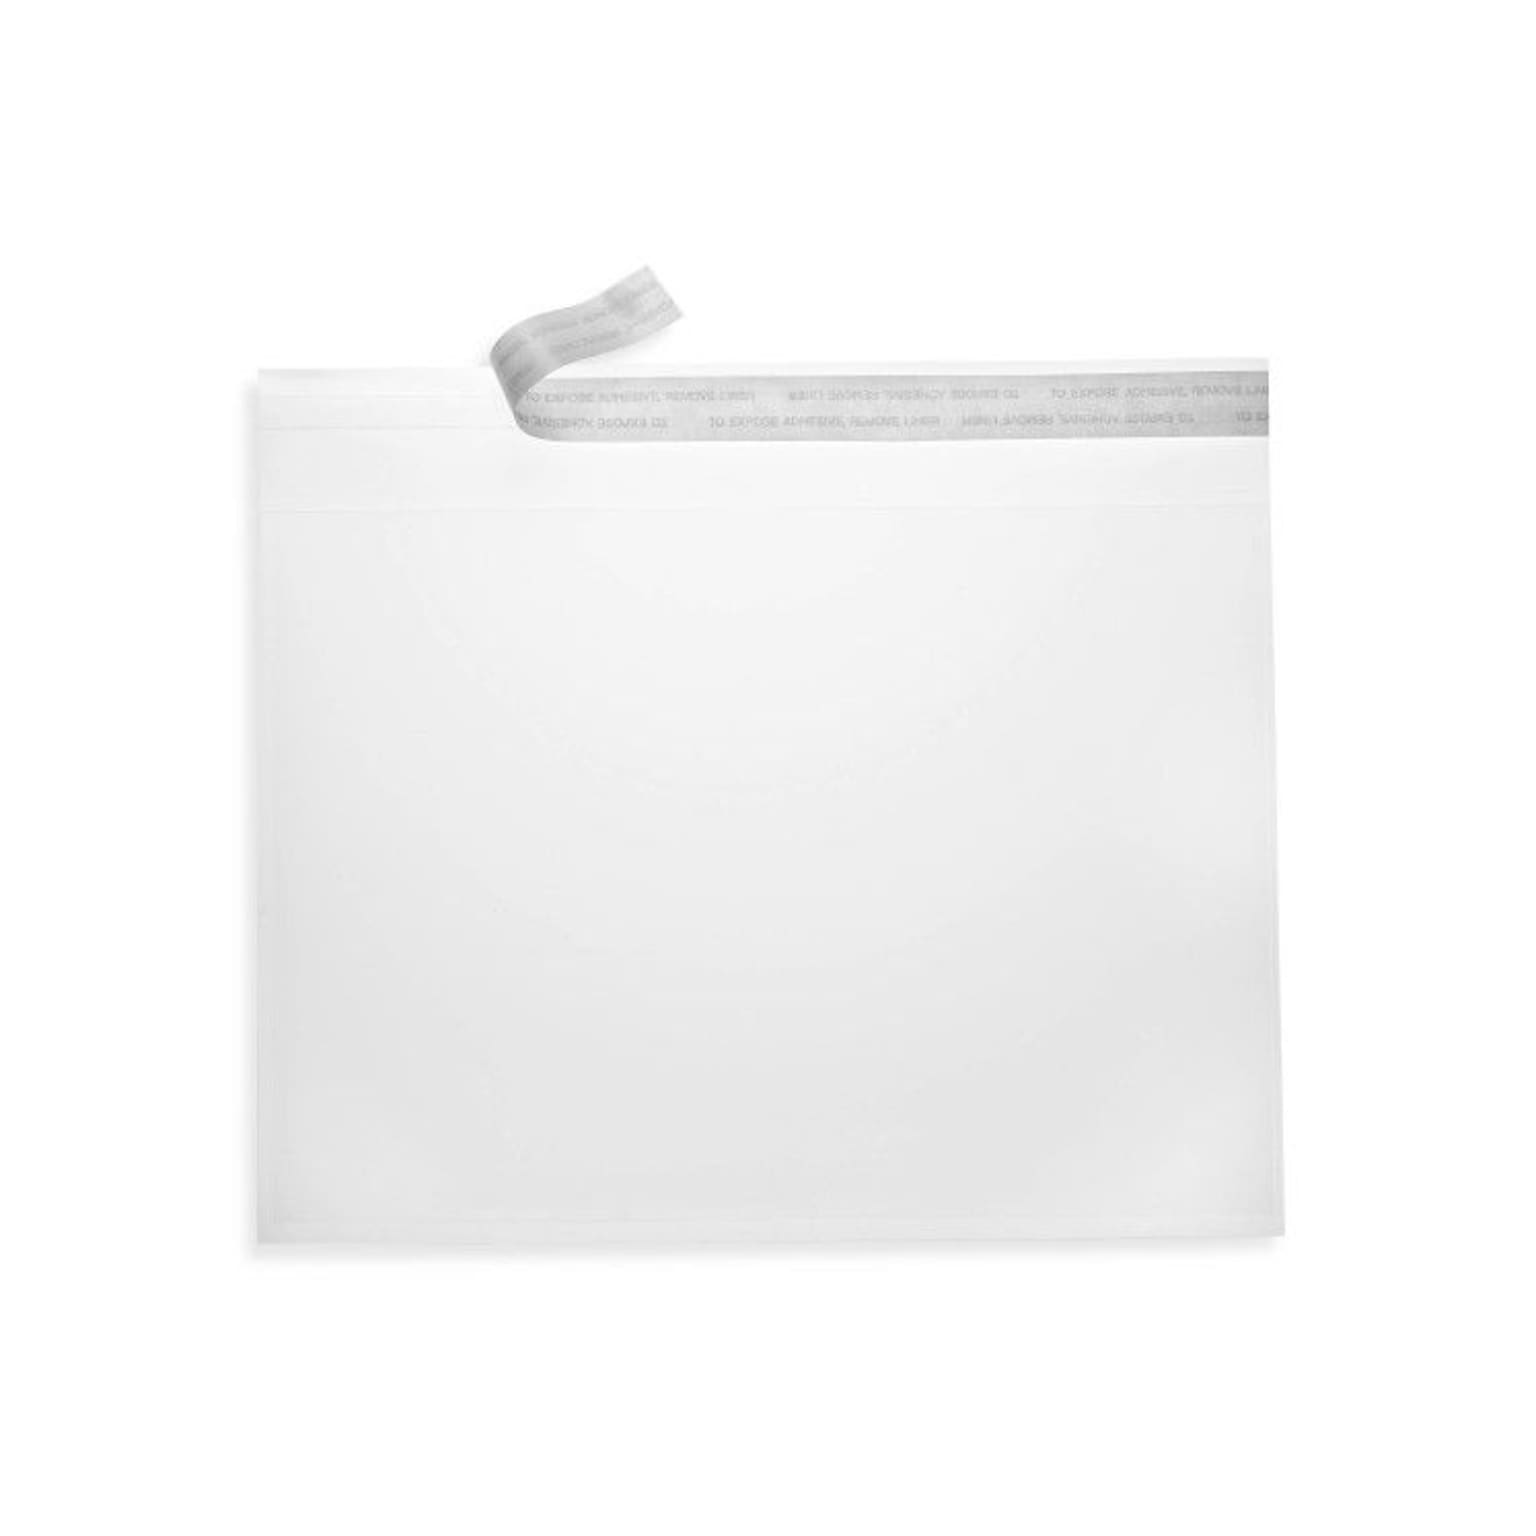 LUX 5 1/4 x 7 1/4 3.5 mil A7 Invitation Envelopes W/Peel & Seal, Crystal Clear, 50/Pack